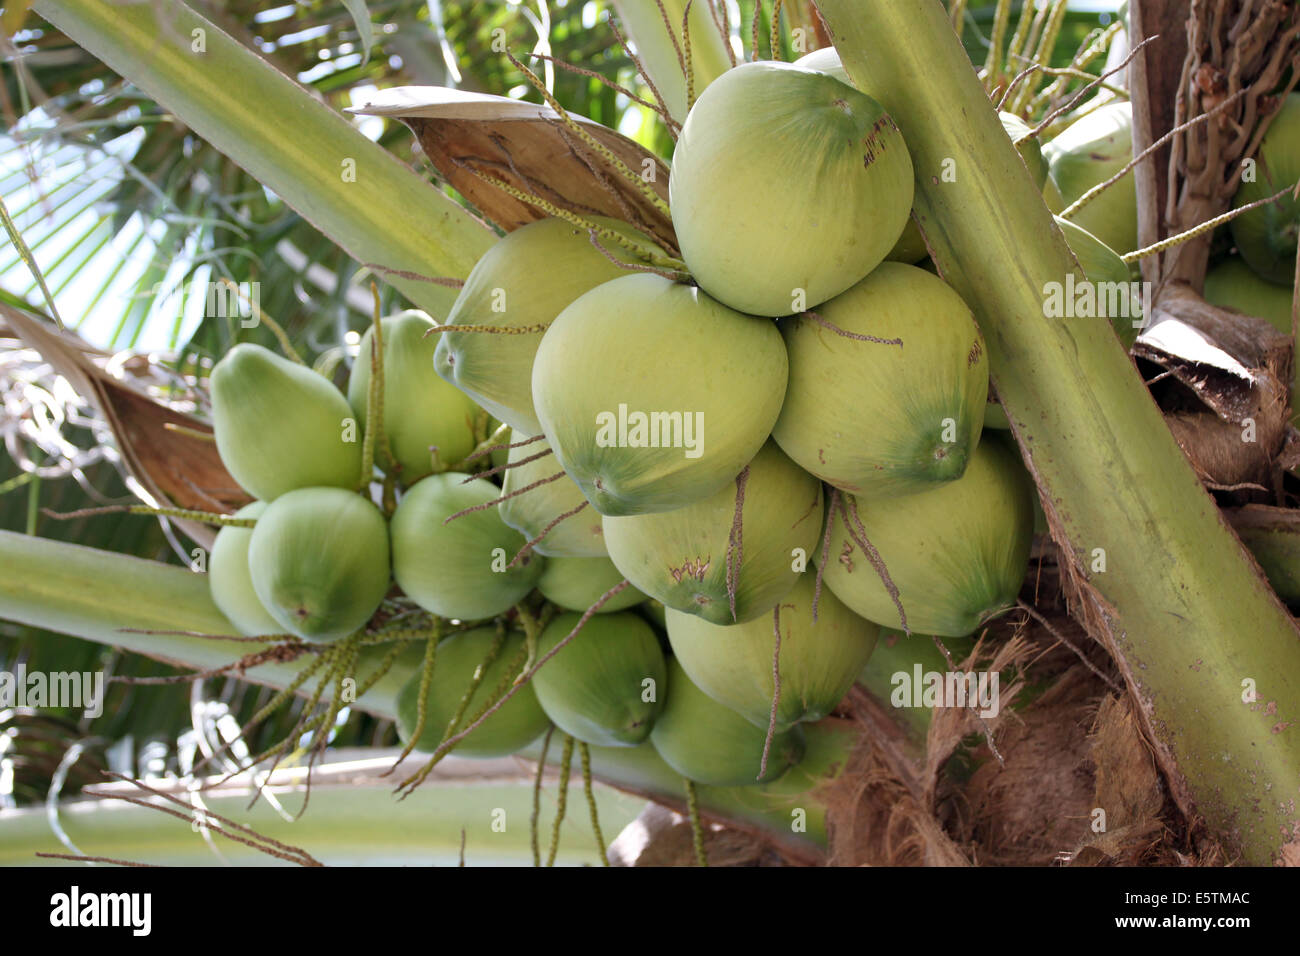 coconut trees are fruiting in the garden. Stock Photo